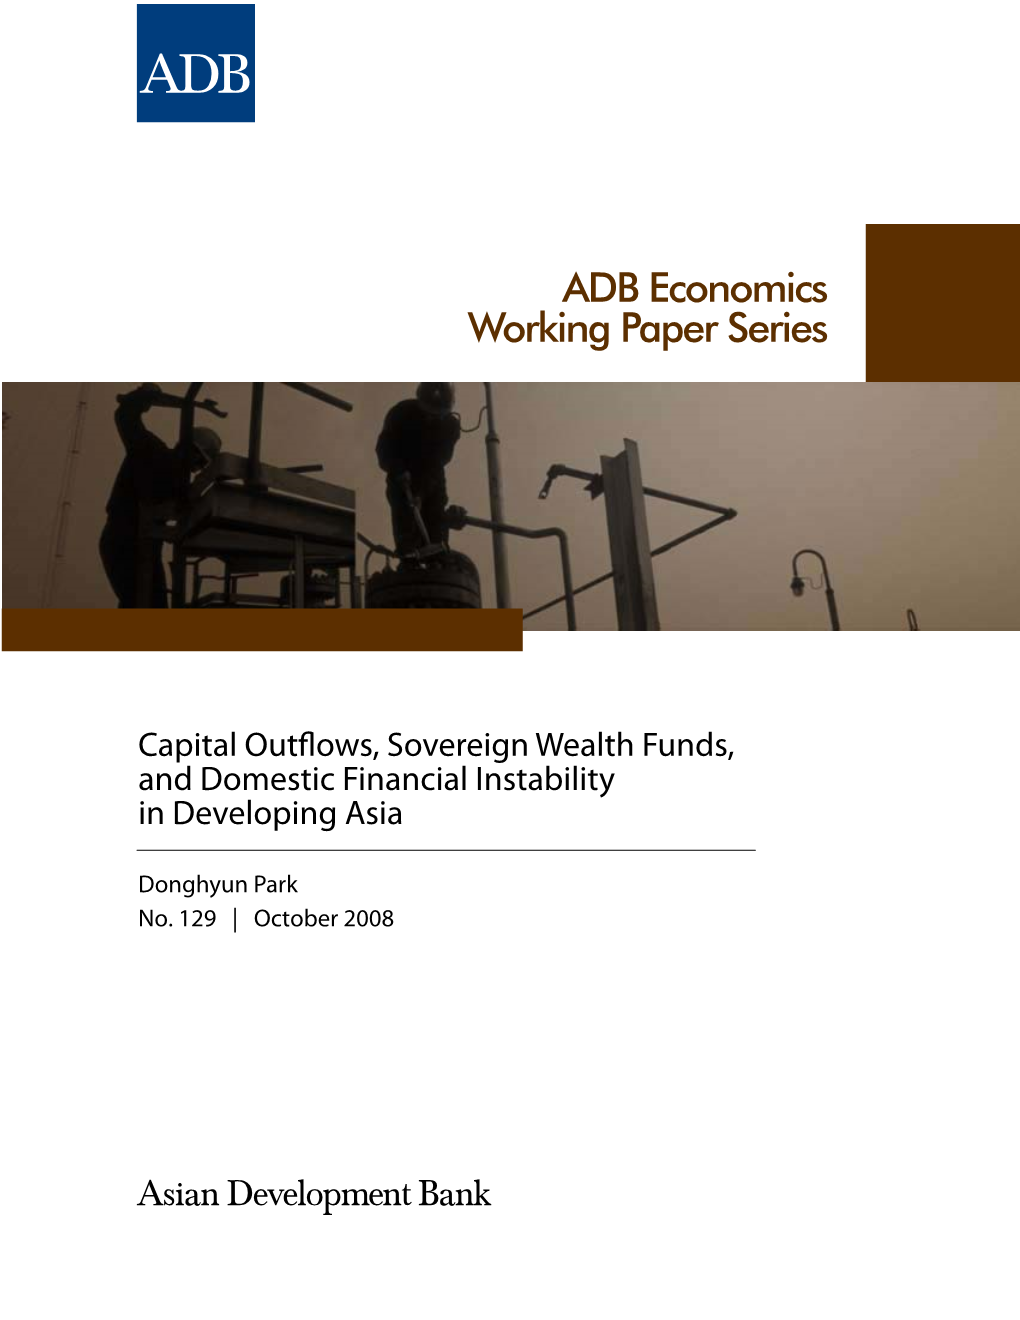 Capital Outflows, Sovereign Wealth Funds, and Domestic Financial Instability in Developing Asia